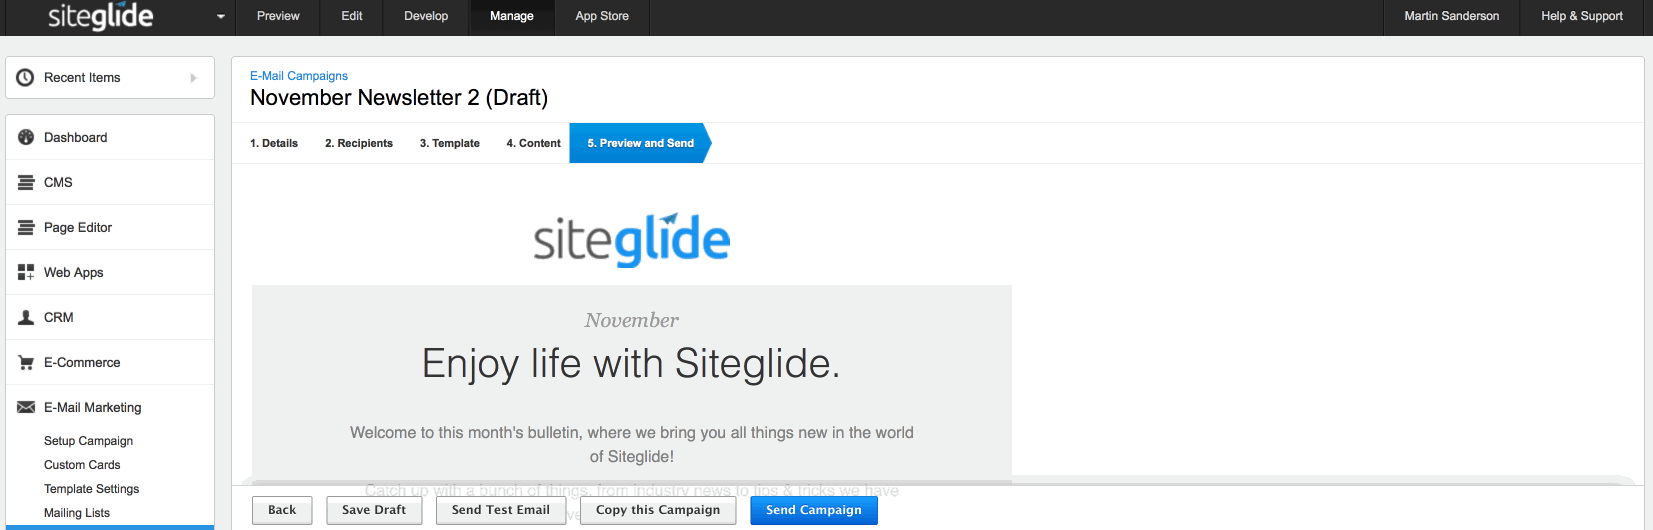 Sending email campaigns with Siteglide